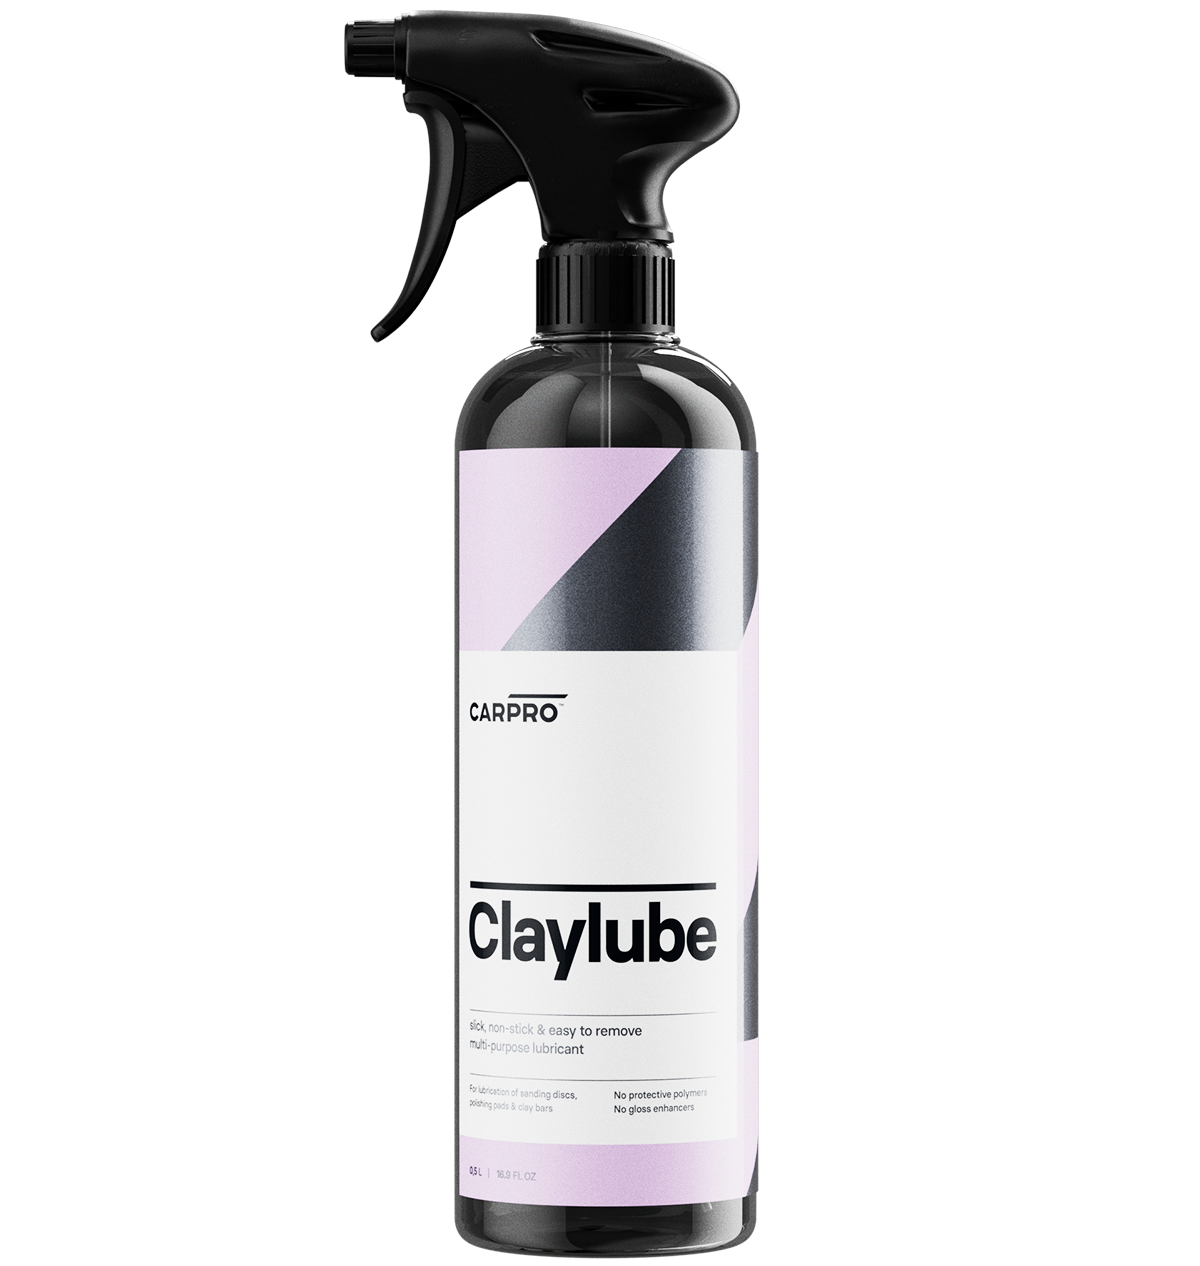 Claylube